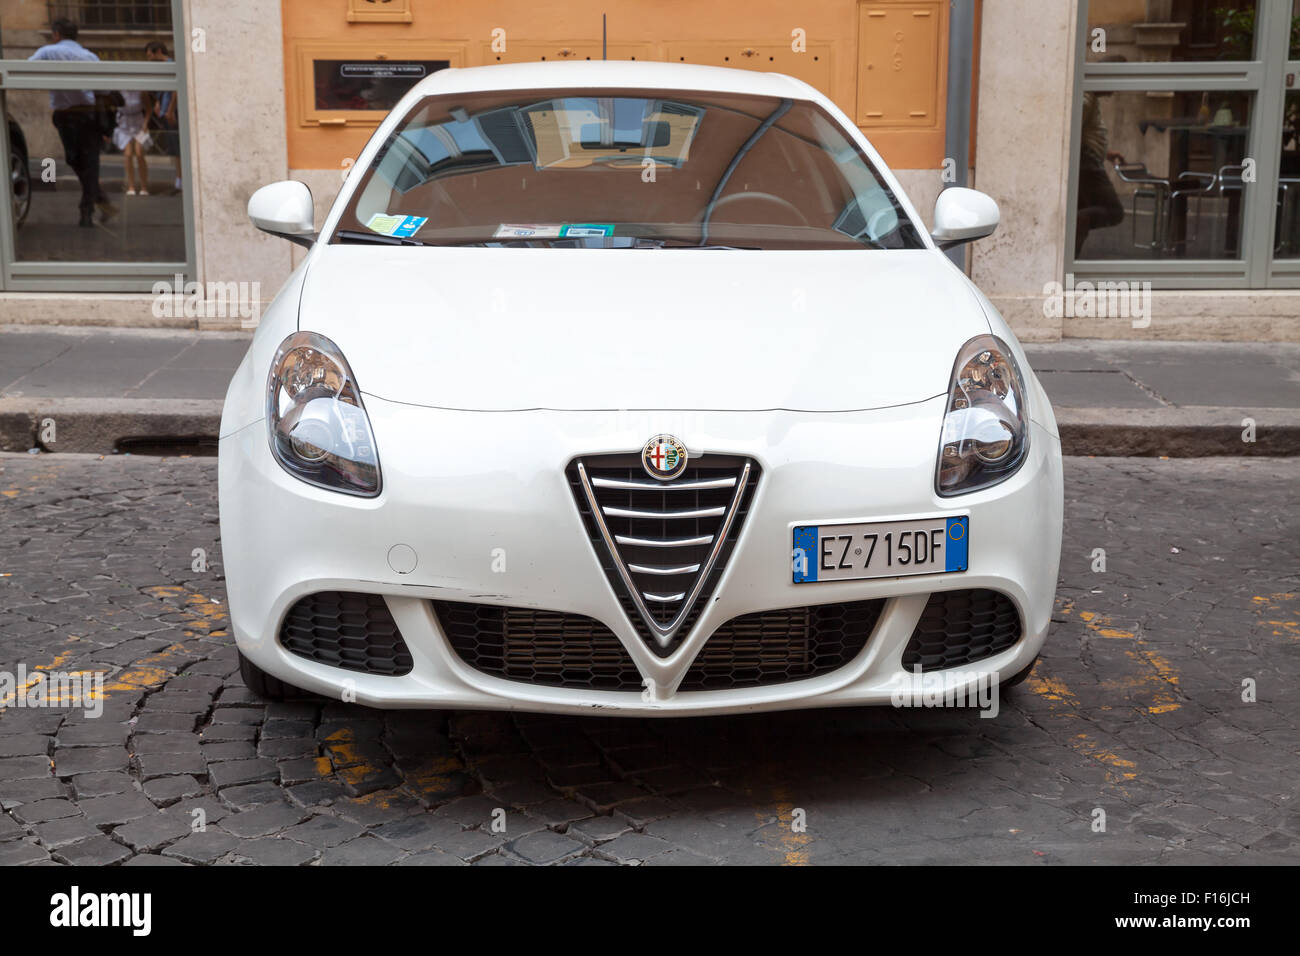 Rome, Italy - August 7, 2015: White Alfa Romeo Giulietta Type 940 car stands parked on the city roadside, close up front view Stock Photo